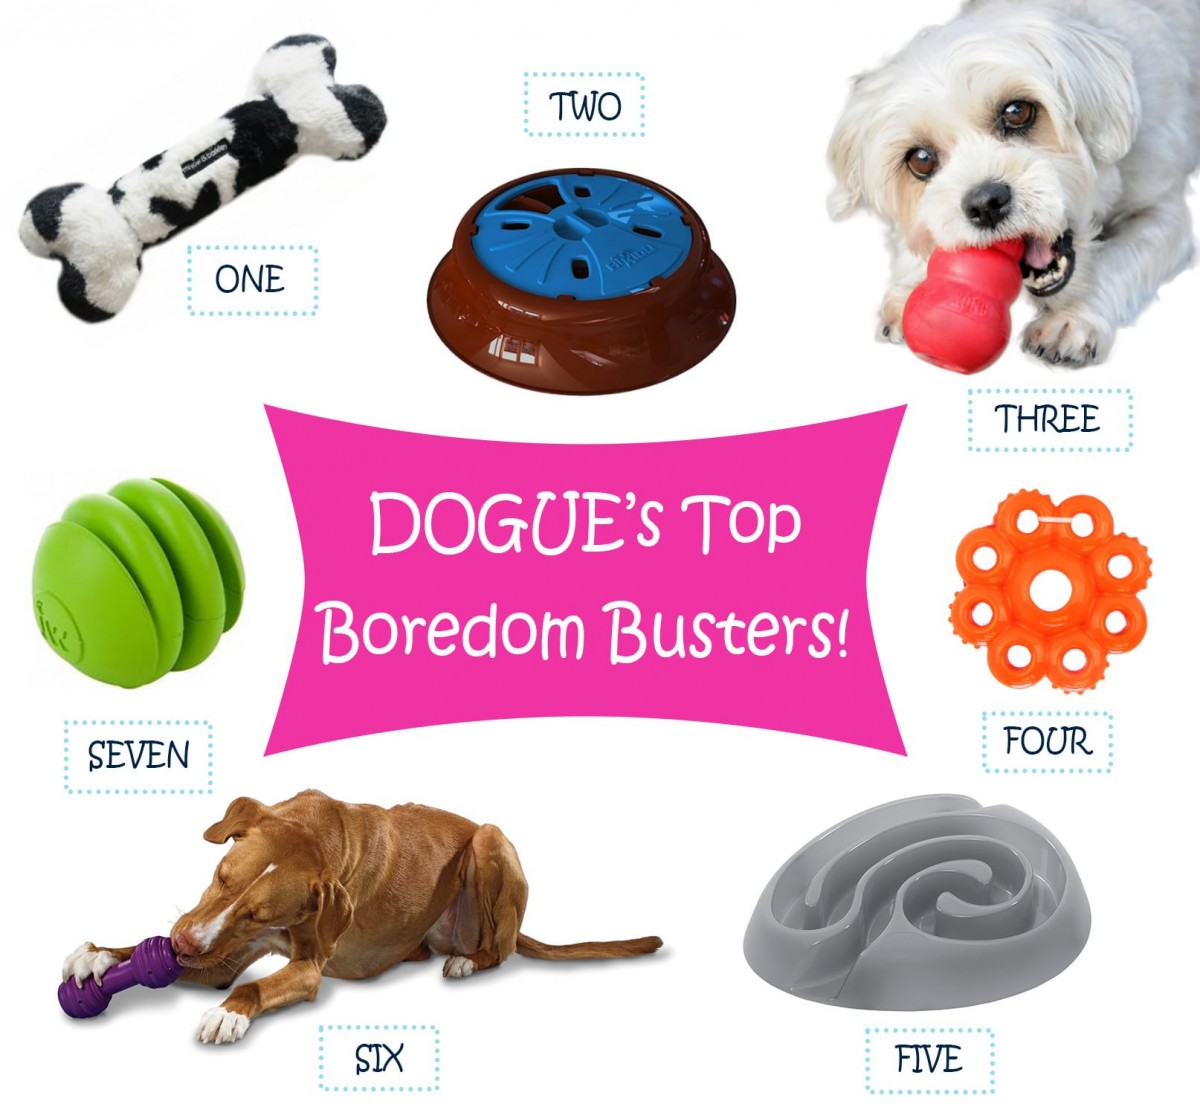 Staff Picks - Boredom Busters for Dogs and Cats